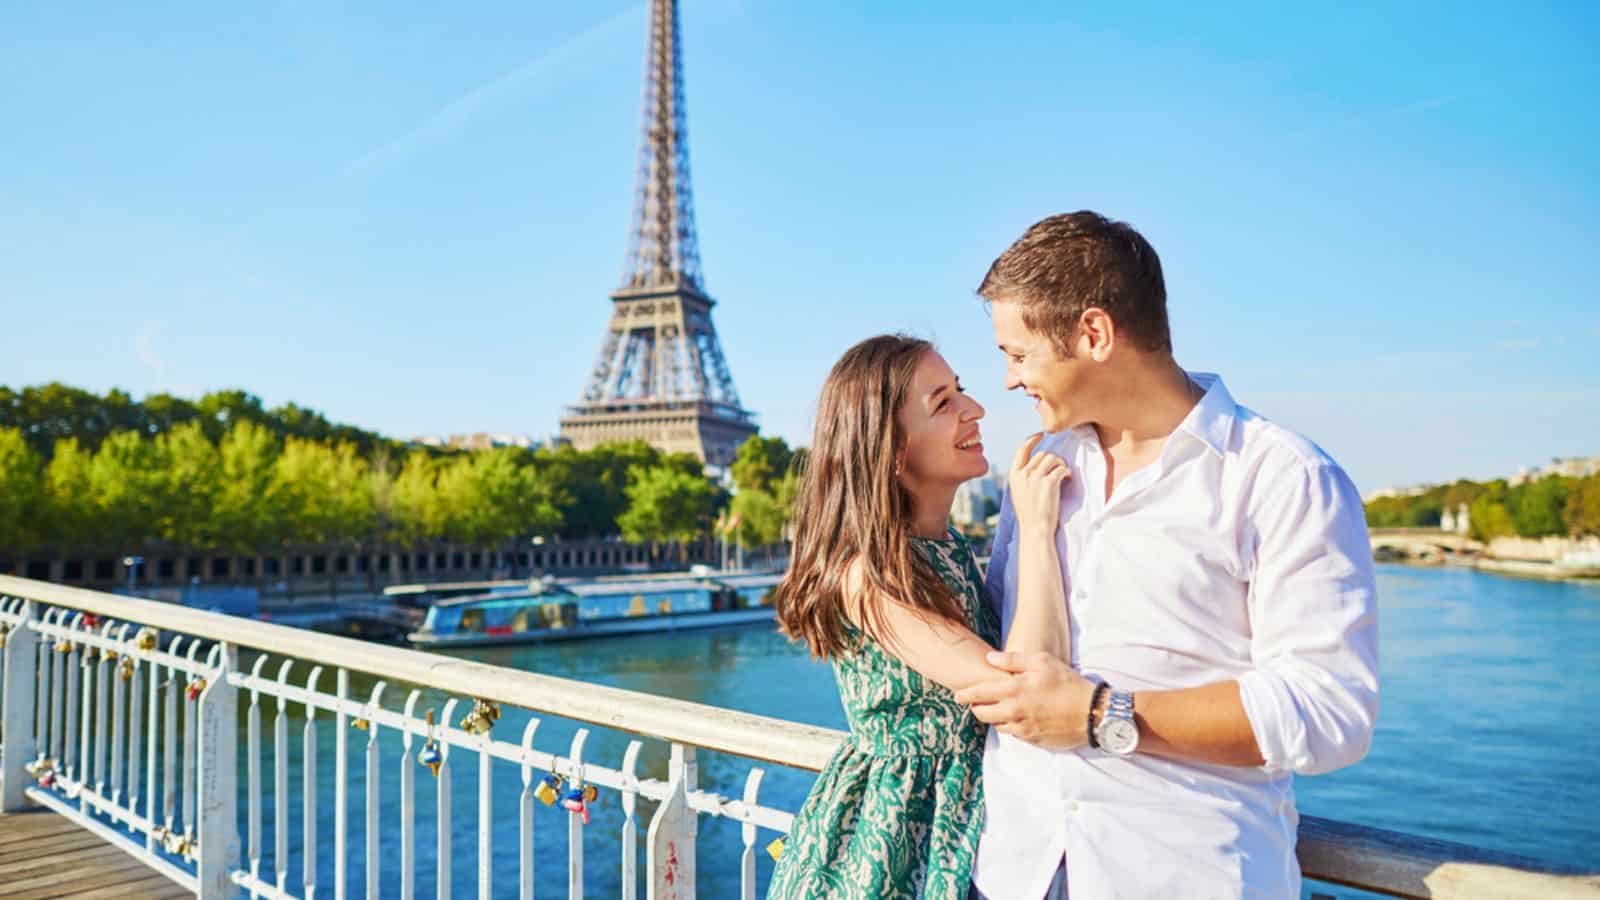 Young romantic couple having a date near the Eiffel tower Paris